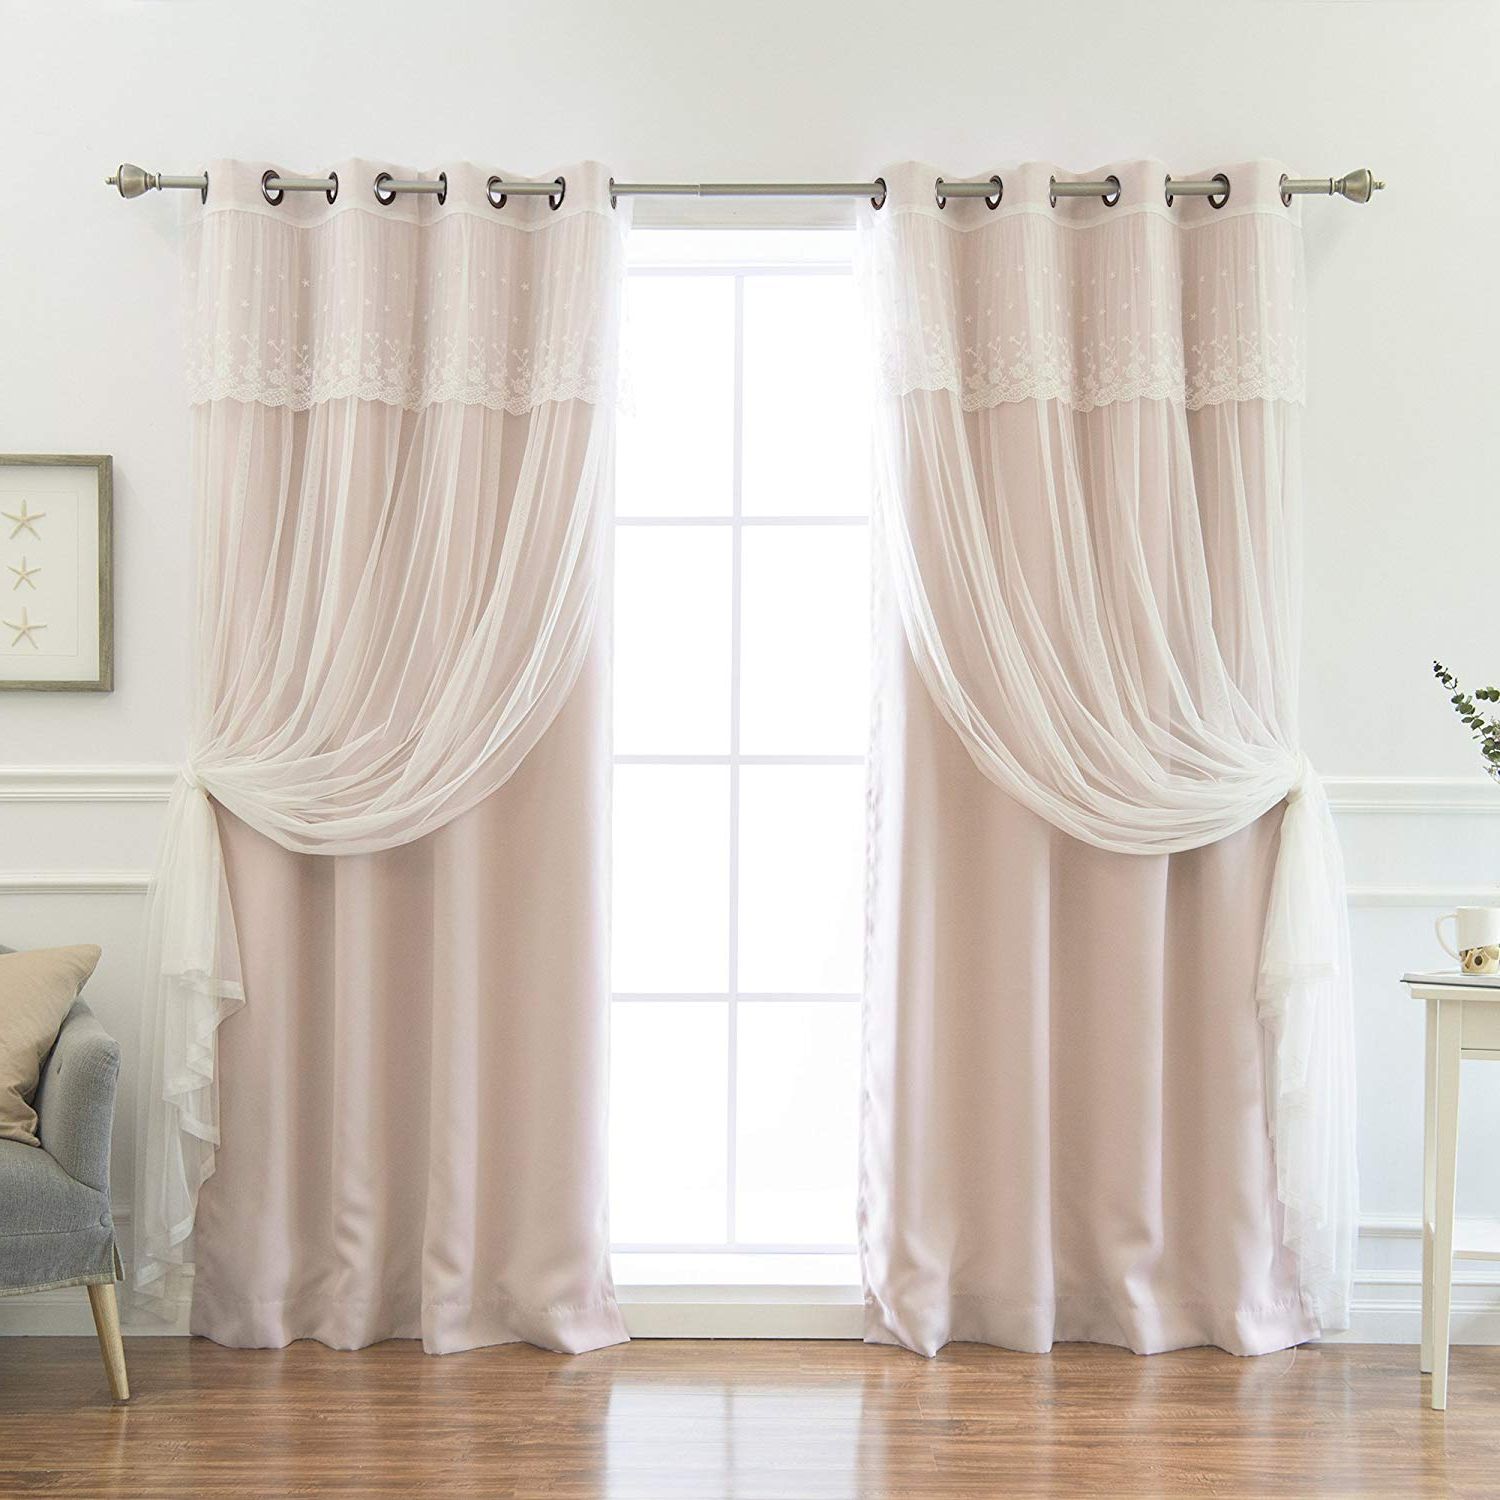 Tulle Sheer With Attached Valance And Blackout 4 Piece Curtain Panel Pairs Intended For Fashionable Best Home Fashion Mix & Match Tulle Sheer With Attached Valance & Solid  Blackout Curtain Set – Stainless Steel Nickel Grommet Top – Dusty Pink –  52"w (View 16 of 20)